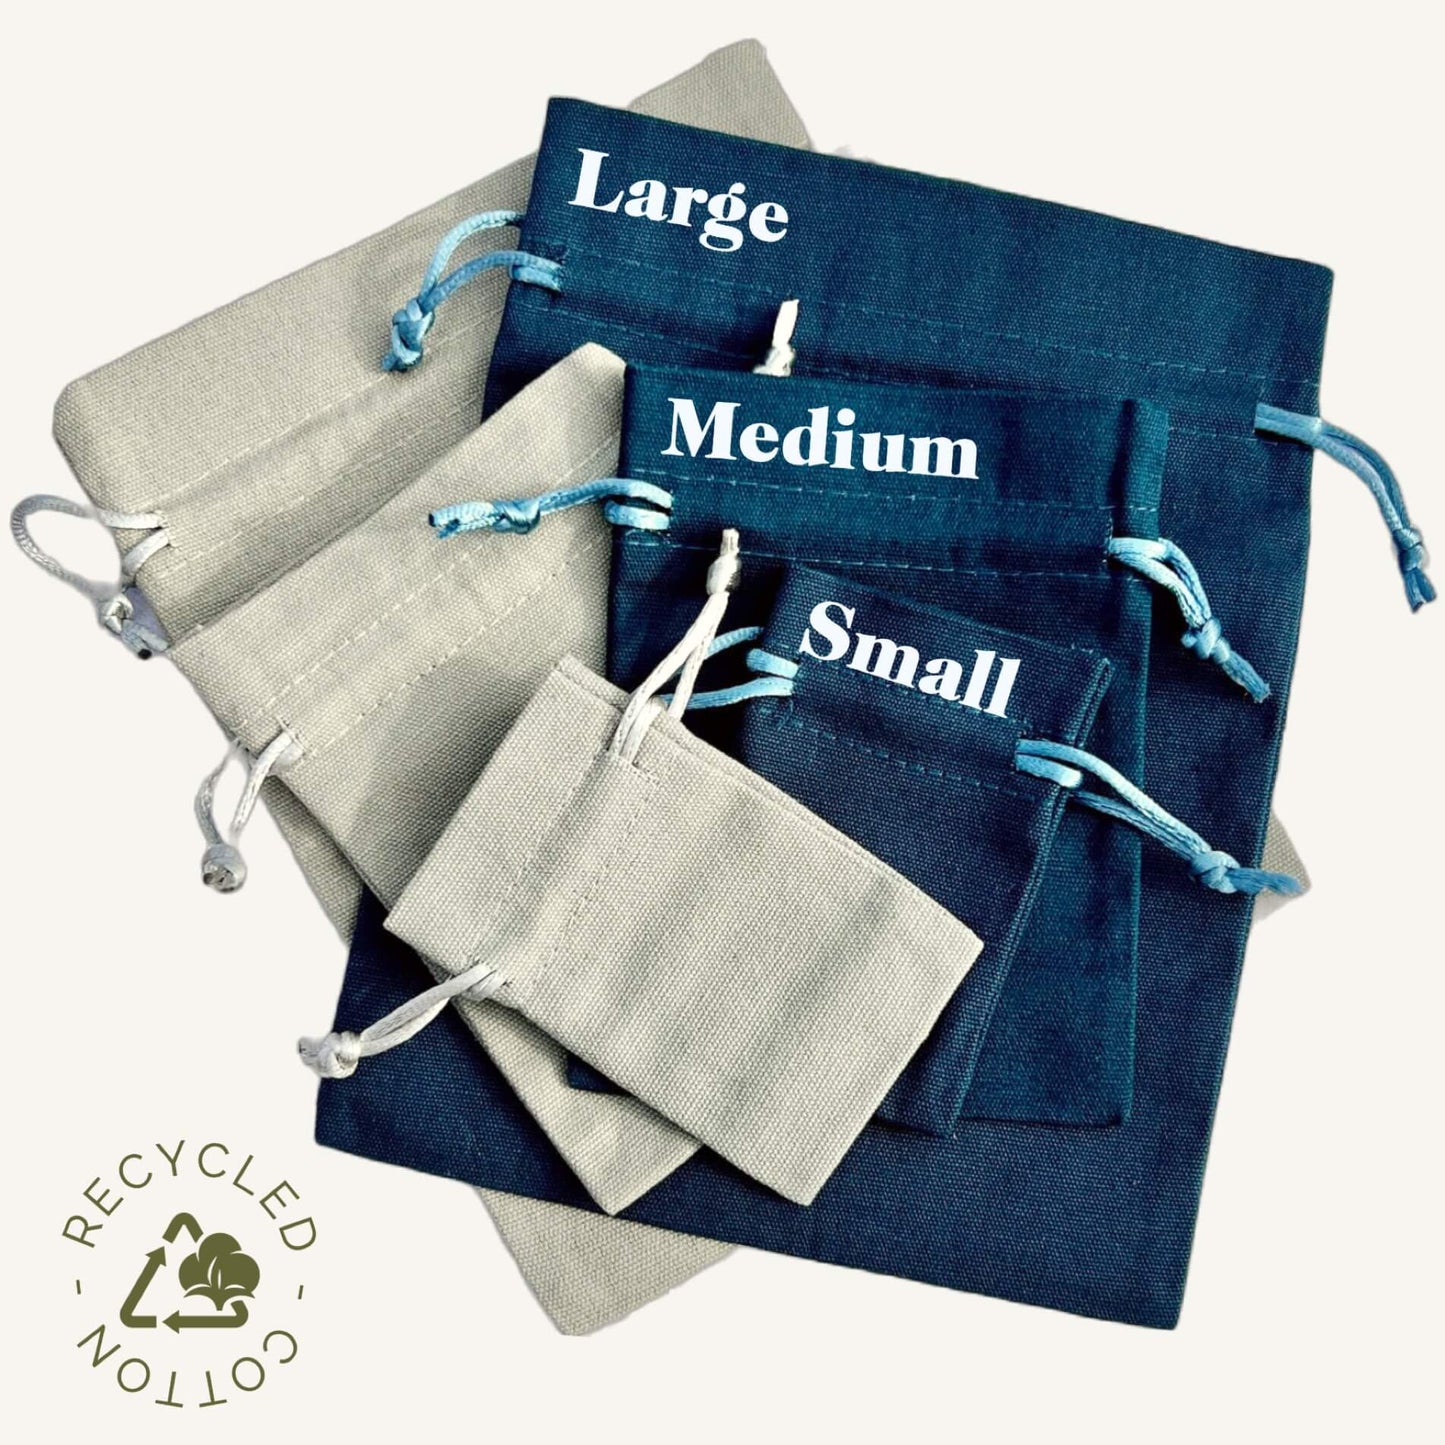 A stack of grey and teal recycled cotton gift bags with size references